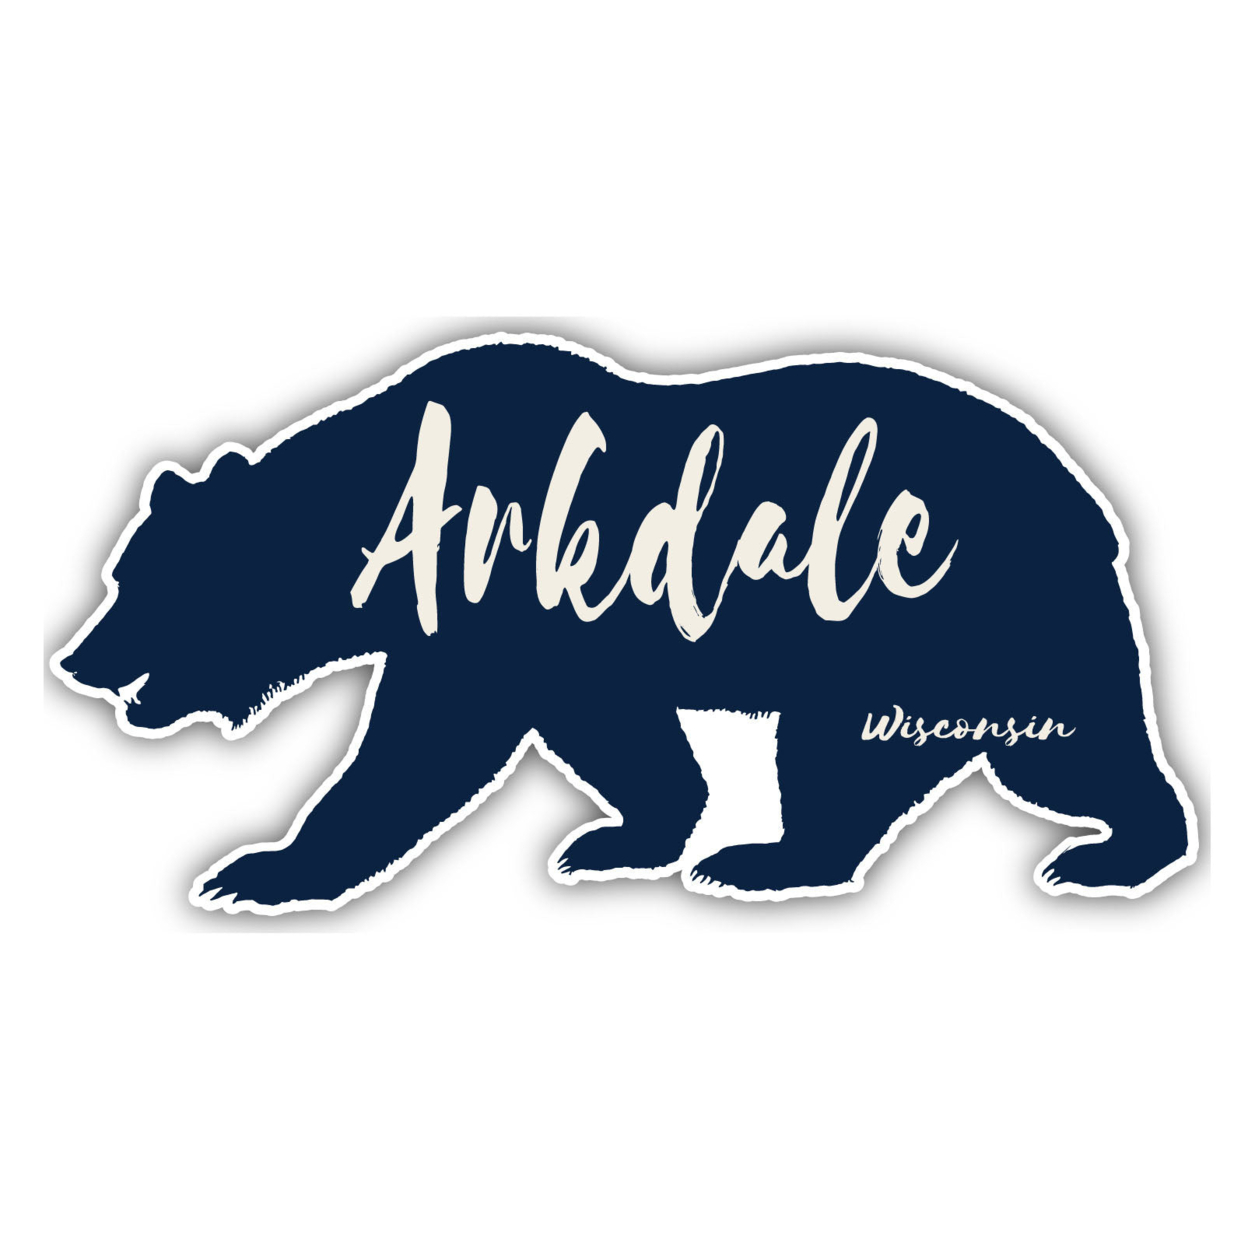 Arkdale Wisconsin Souvenir Decorative Stickers (Choose Theme And Size) - 4-Pack, 12-Inch, Bear